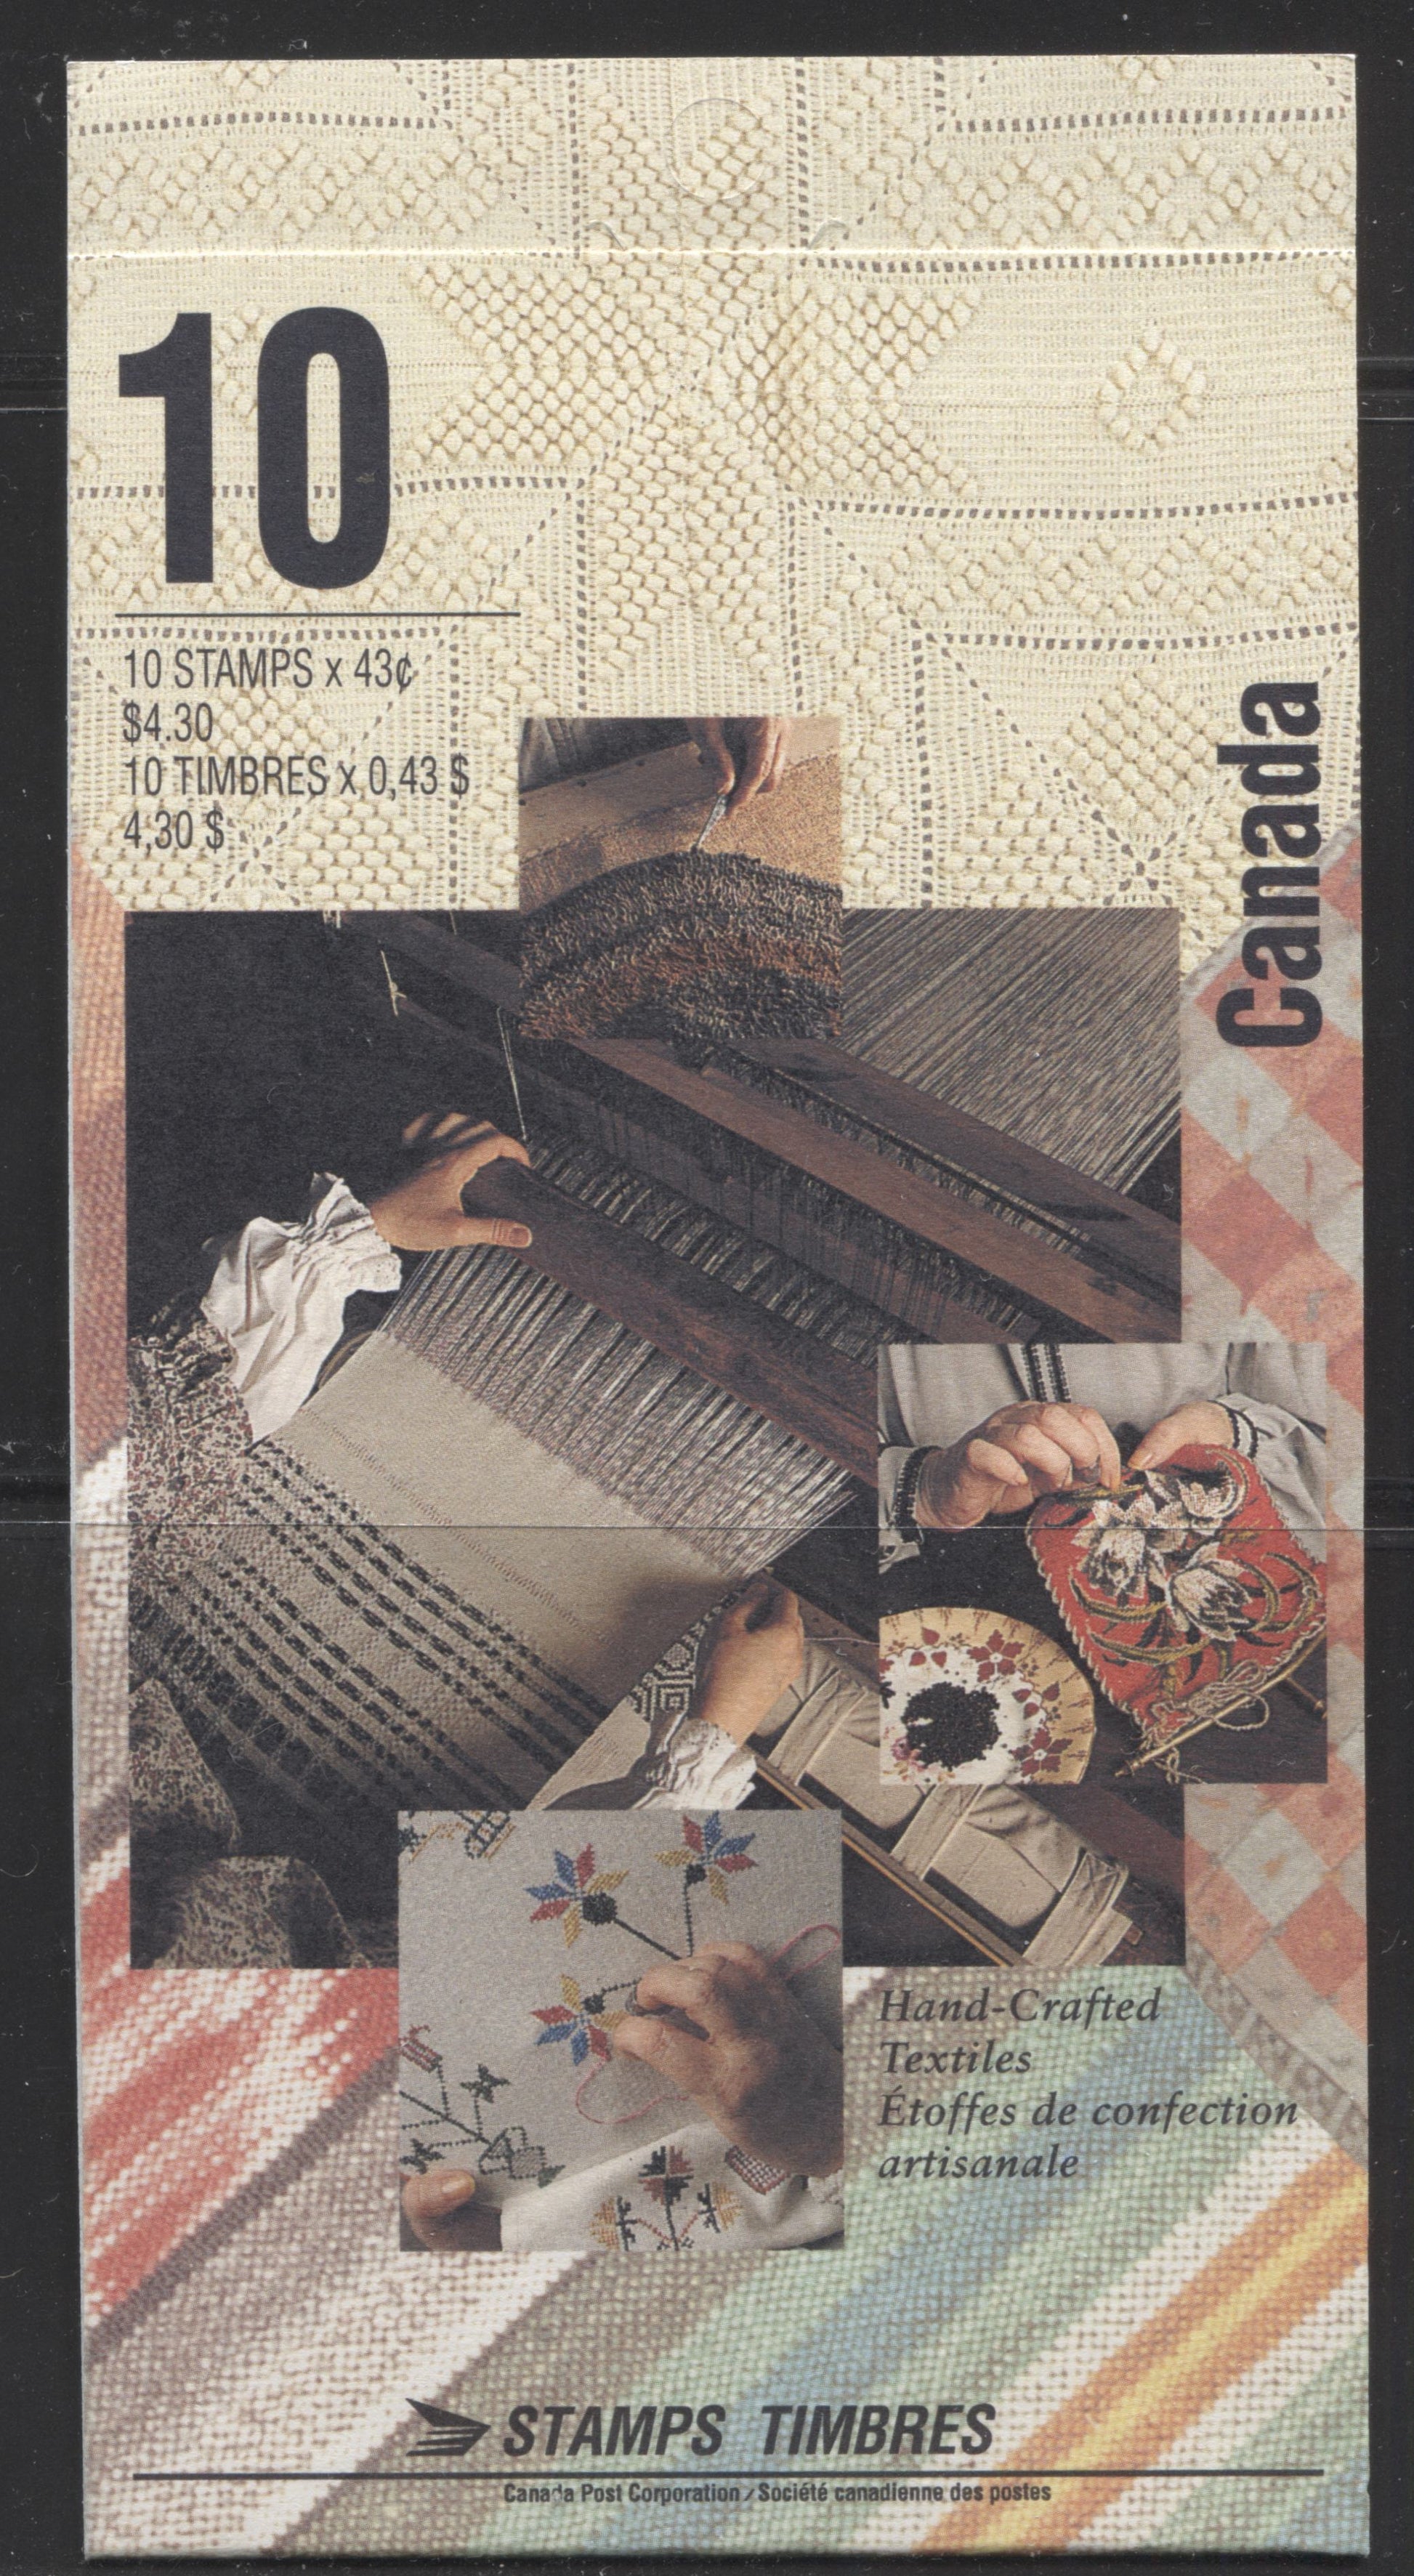 Canada #BK159a-b 1993 Hand Crafted Textiles Issue, Complete $4.30 Booklet, Harrison Paper, Dead Paper, 4 mm GT-4 Tagging Brixton Chrome 